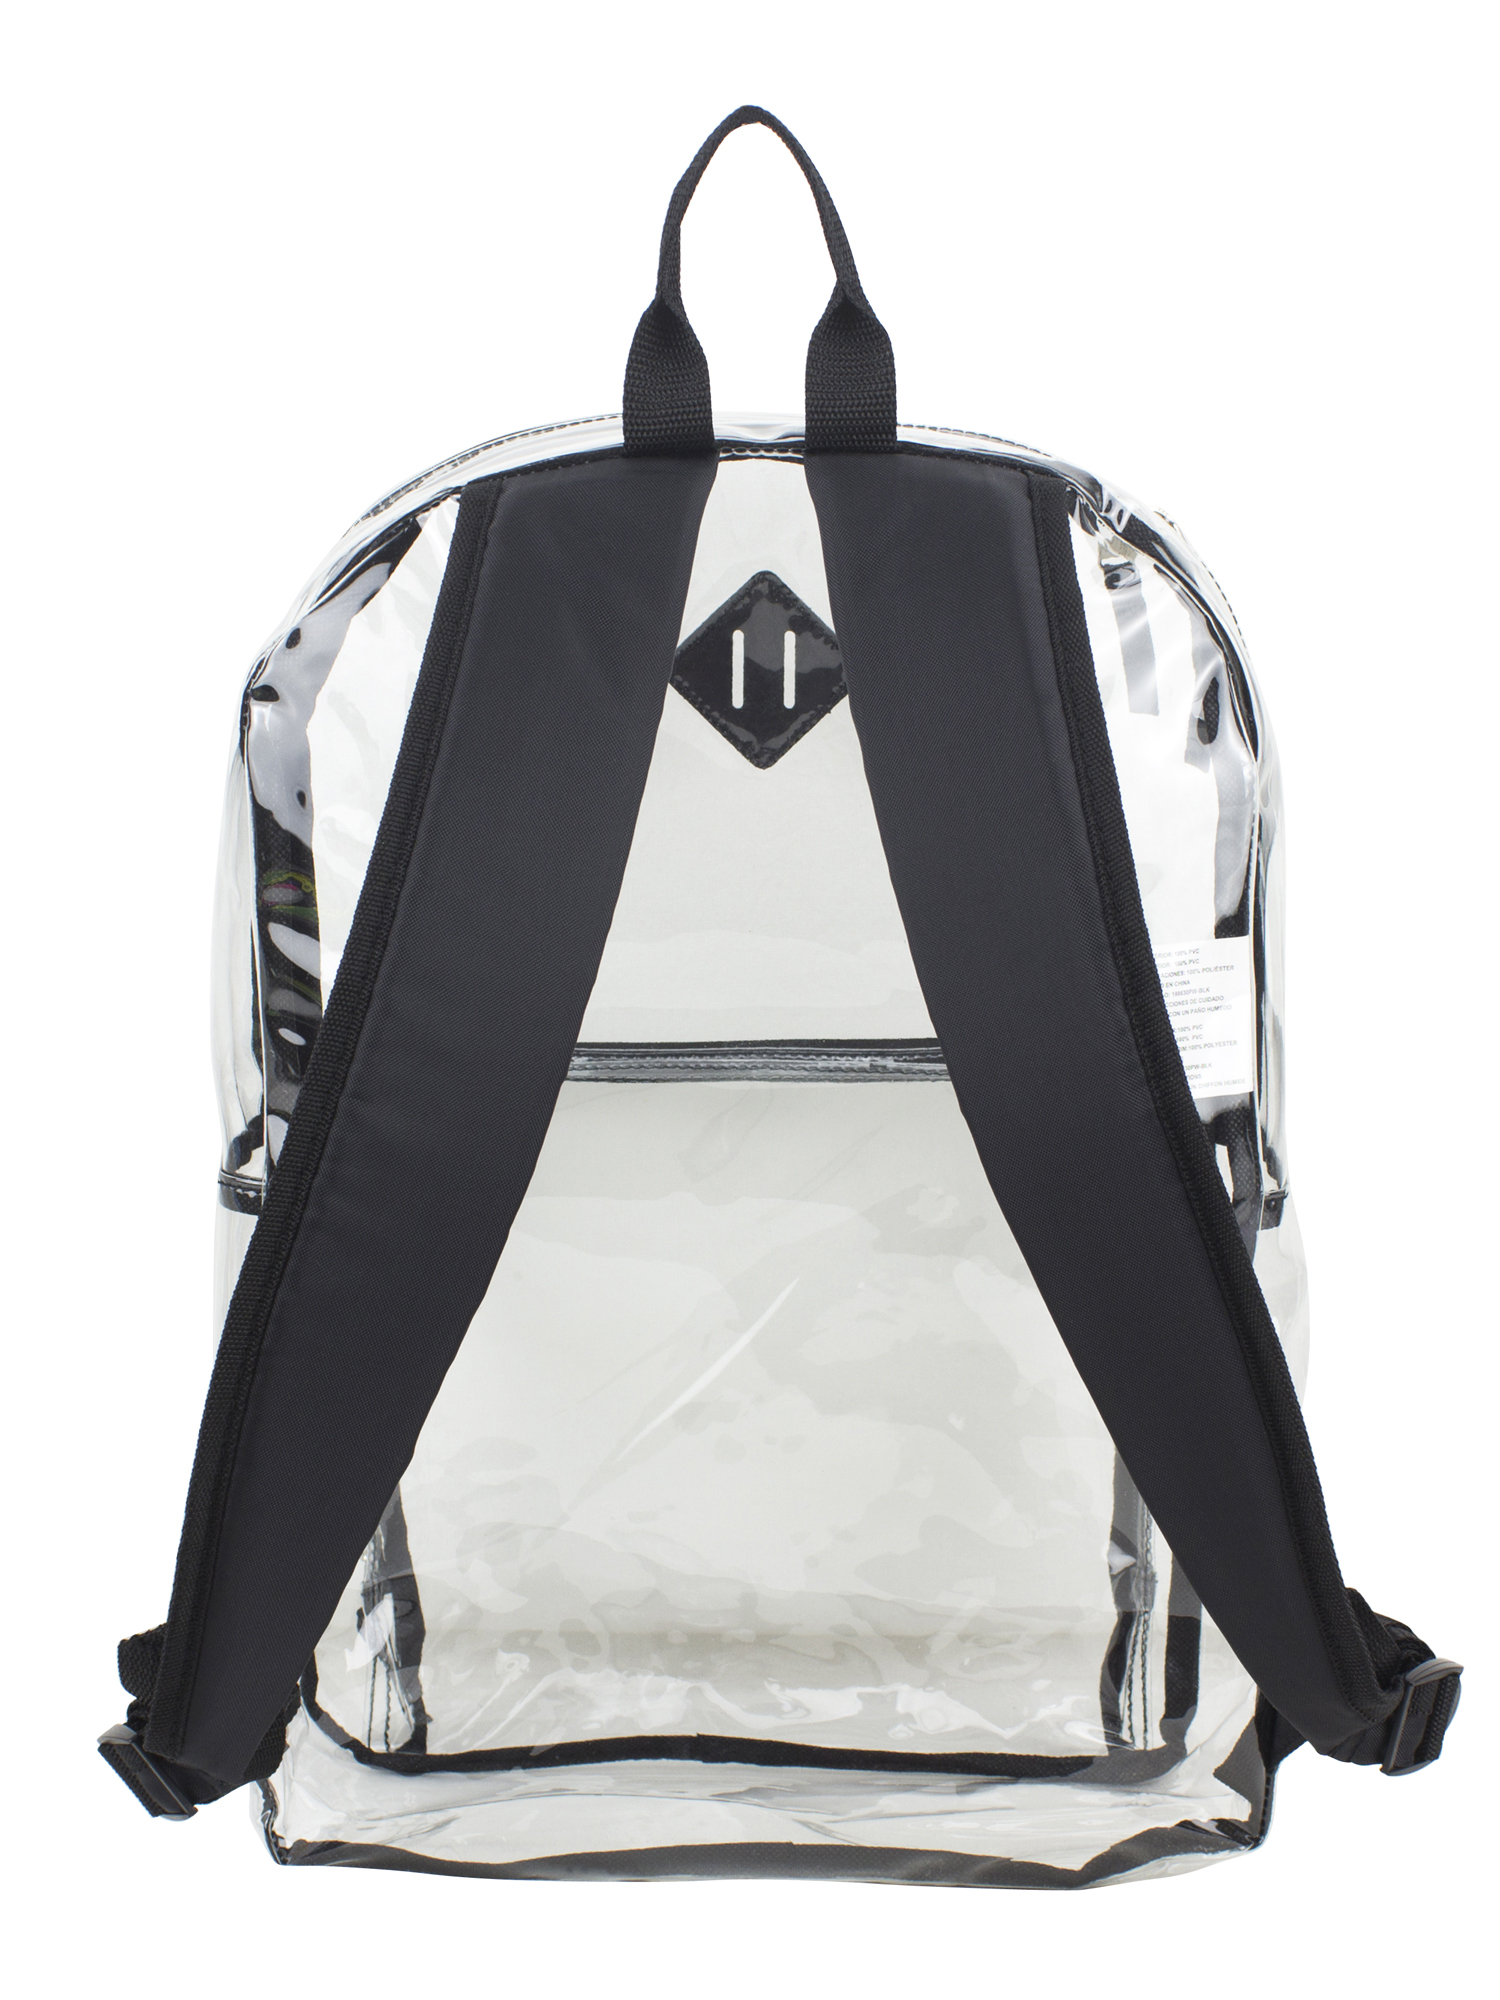 Eastsport Unisex Multi-Purpose Clear Backpack with Front Pocket, Adjustable Straps and Lash Tab Clear - image 2 of 6